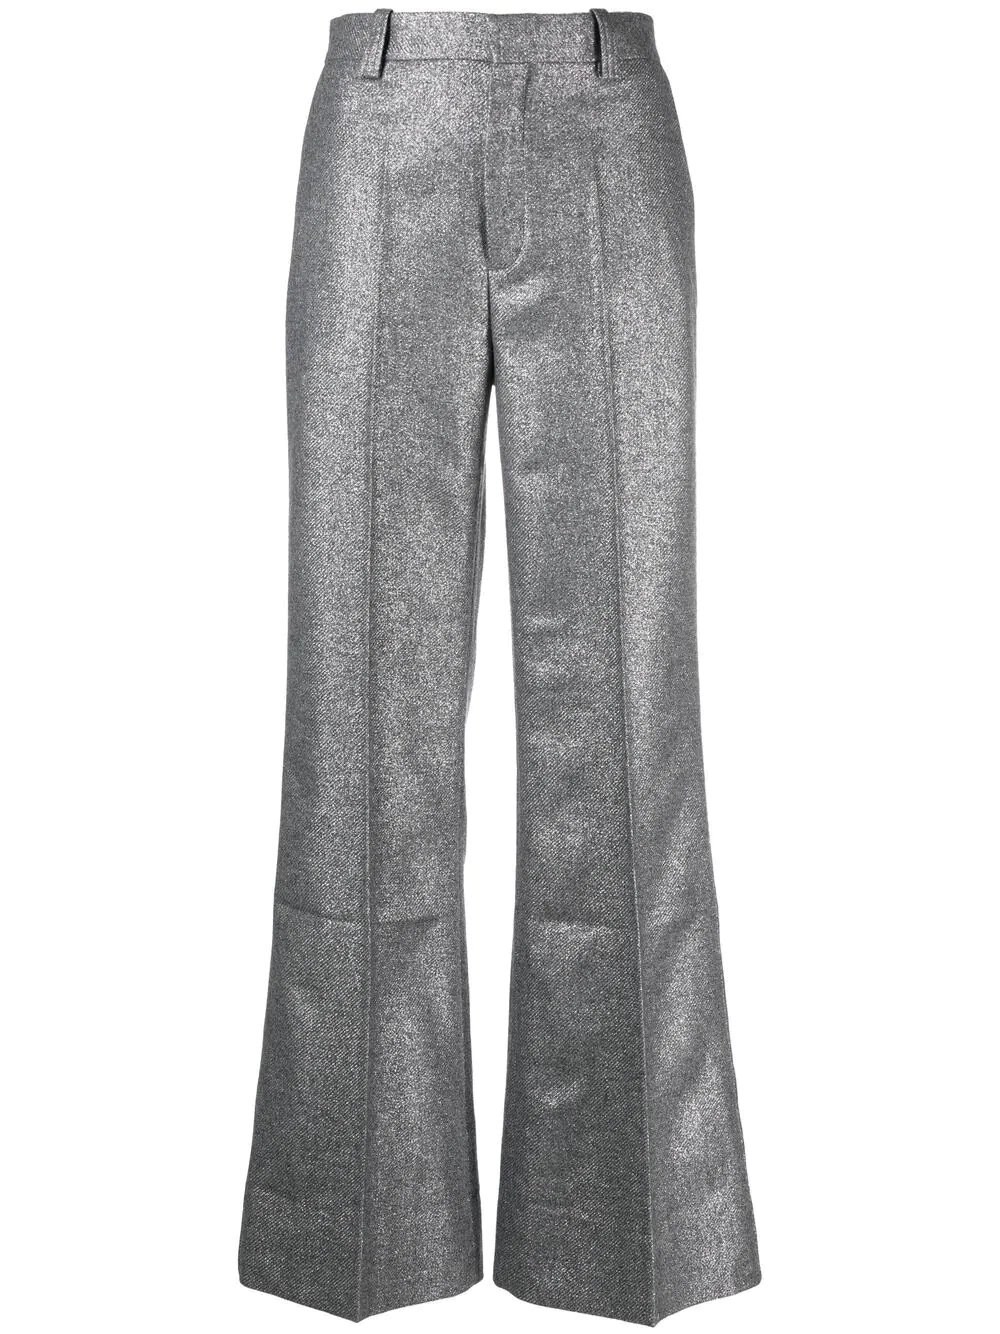 RODEBJER EMMA TROUSERS